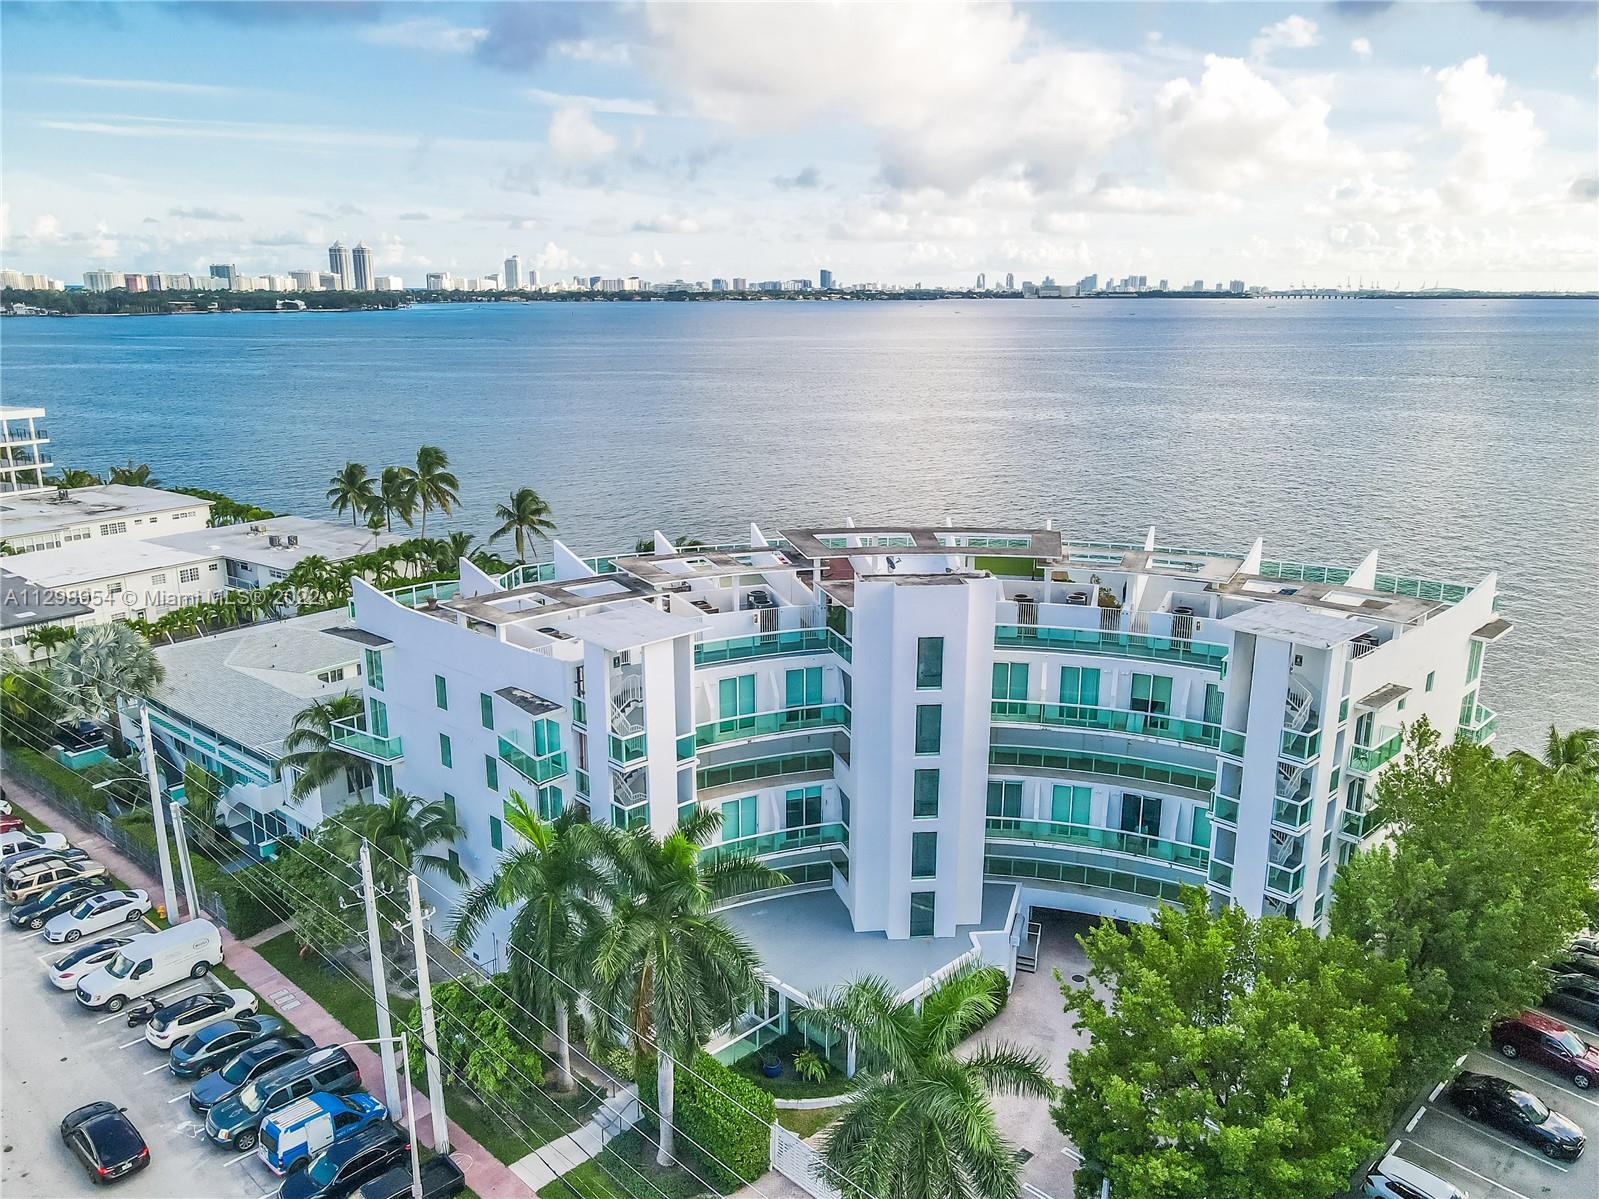 Amazing duplex style condo with endless open bay view and a separate private roof top terrace to enjoy the best sunsets of Miami Beach!. If you are looking for a great location just minutes from the beach and minutes from downtown Brickell but with a privacy of a townhouse style, this is for you. 
First floor will welcome you with a large open kitchen with SS appliances, double high impact glass sliding doors with large balcony facing the bay, second floor all natural wooden flooring with open master bedroom loft style, marble bathroom. Split floor plan for second guest bedroom and bathroom and additional second balcony. This unique unit comes with a private gated terrace that could be used as Yoga room, solarium, party room with unobstructed bay views and skyline. Come and make it yours!